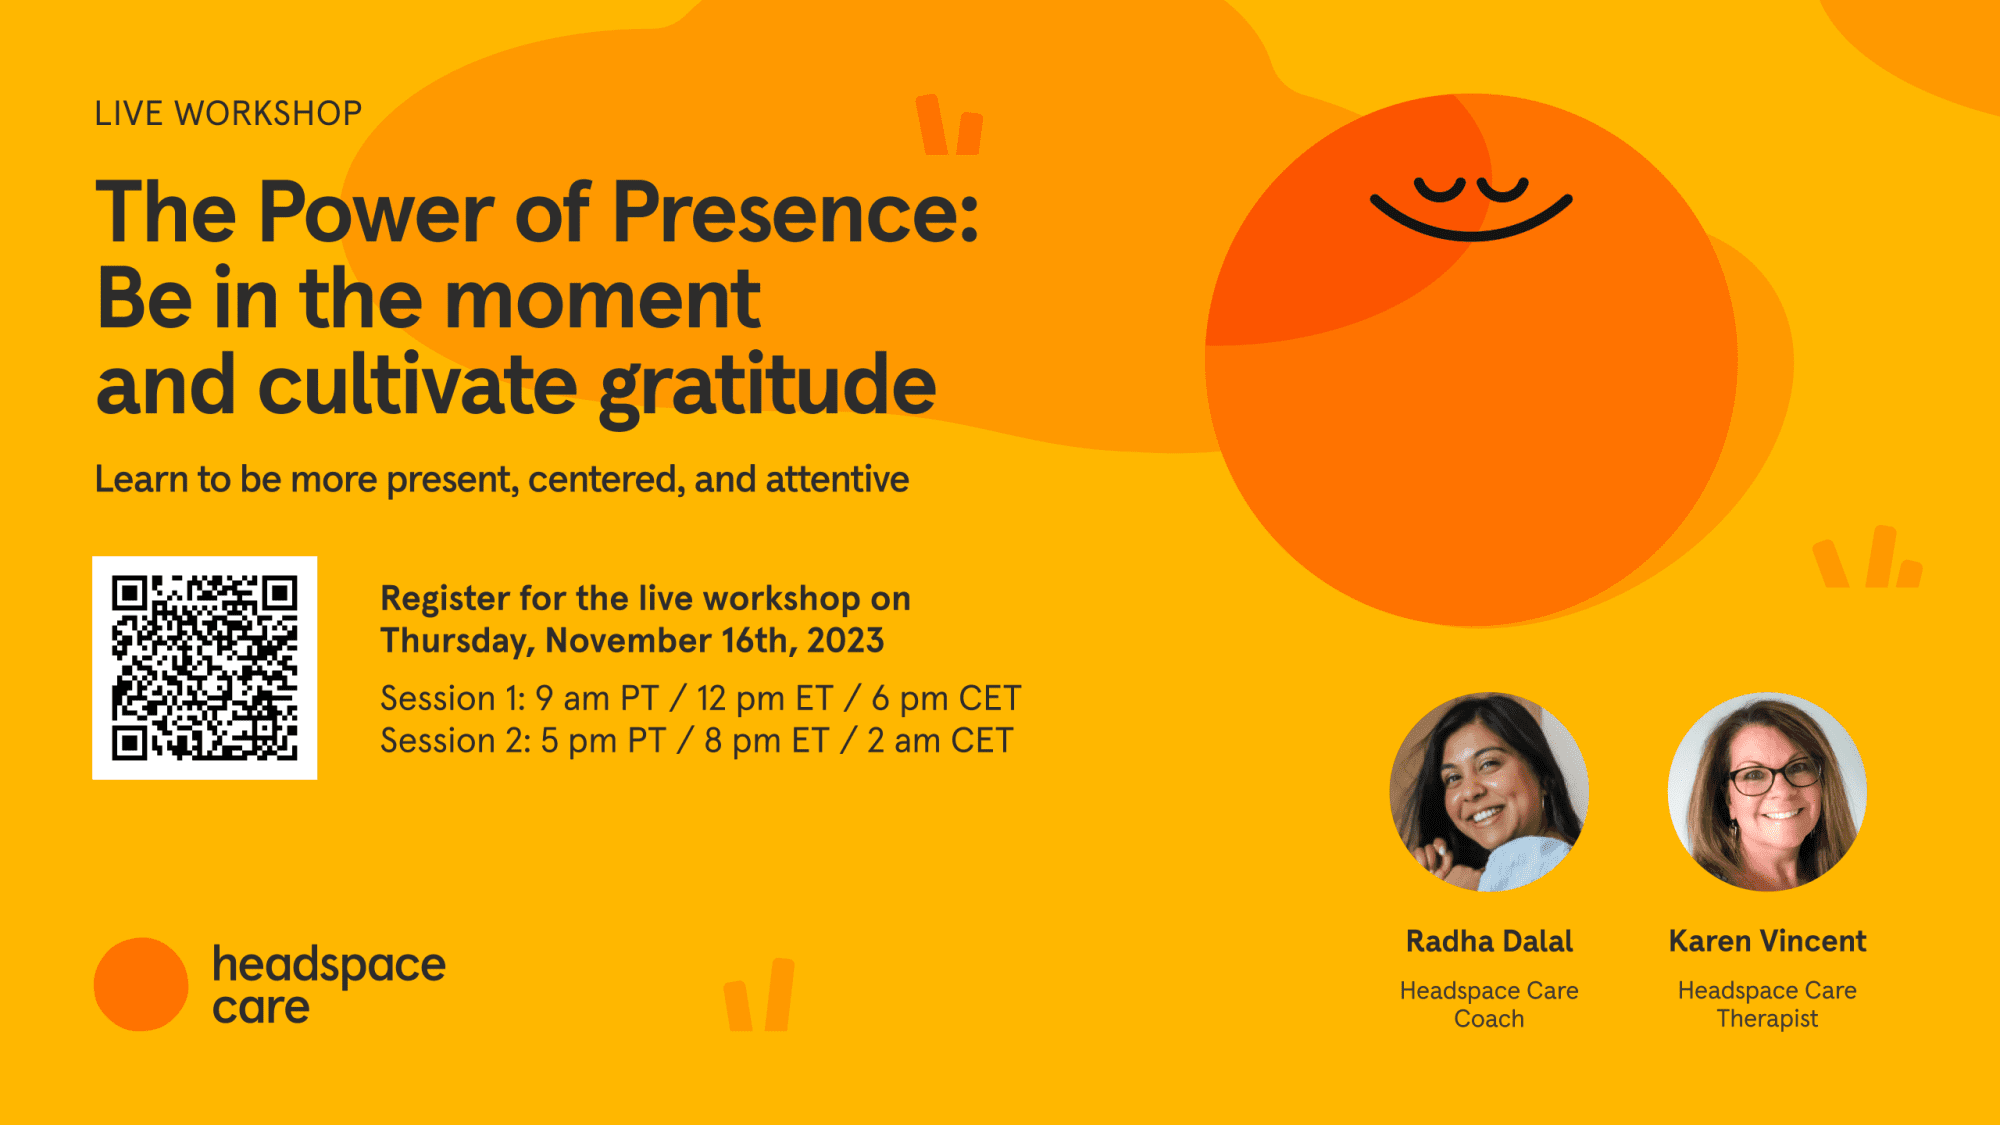 The Power of Presence: Be in the moment and cultivate gratitude signage